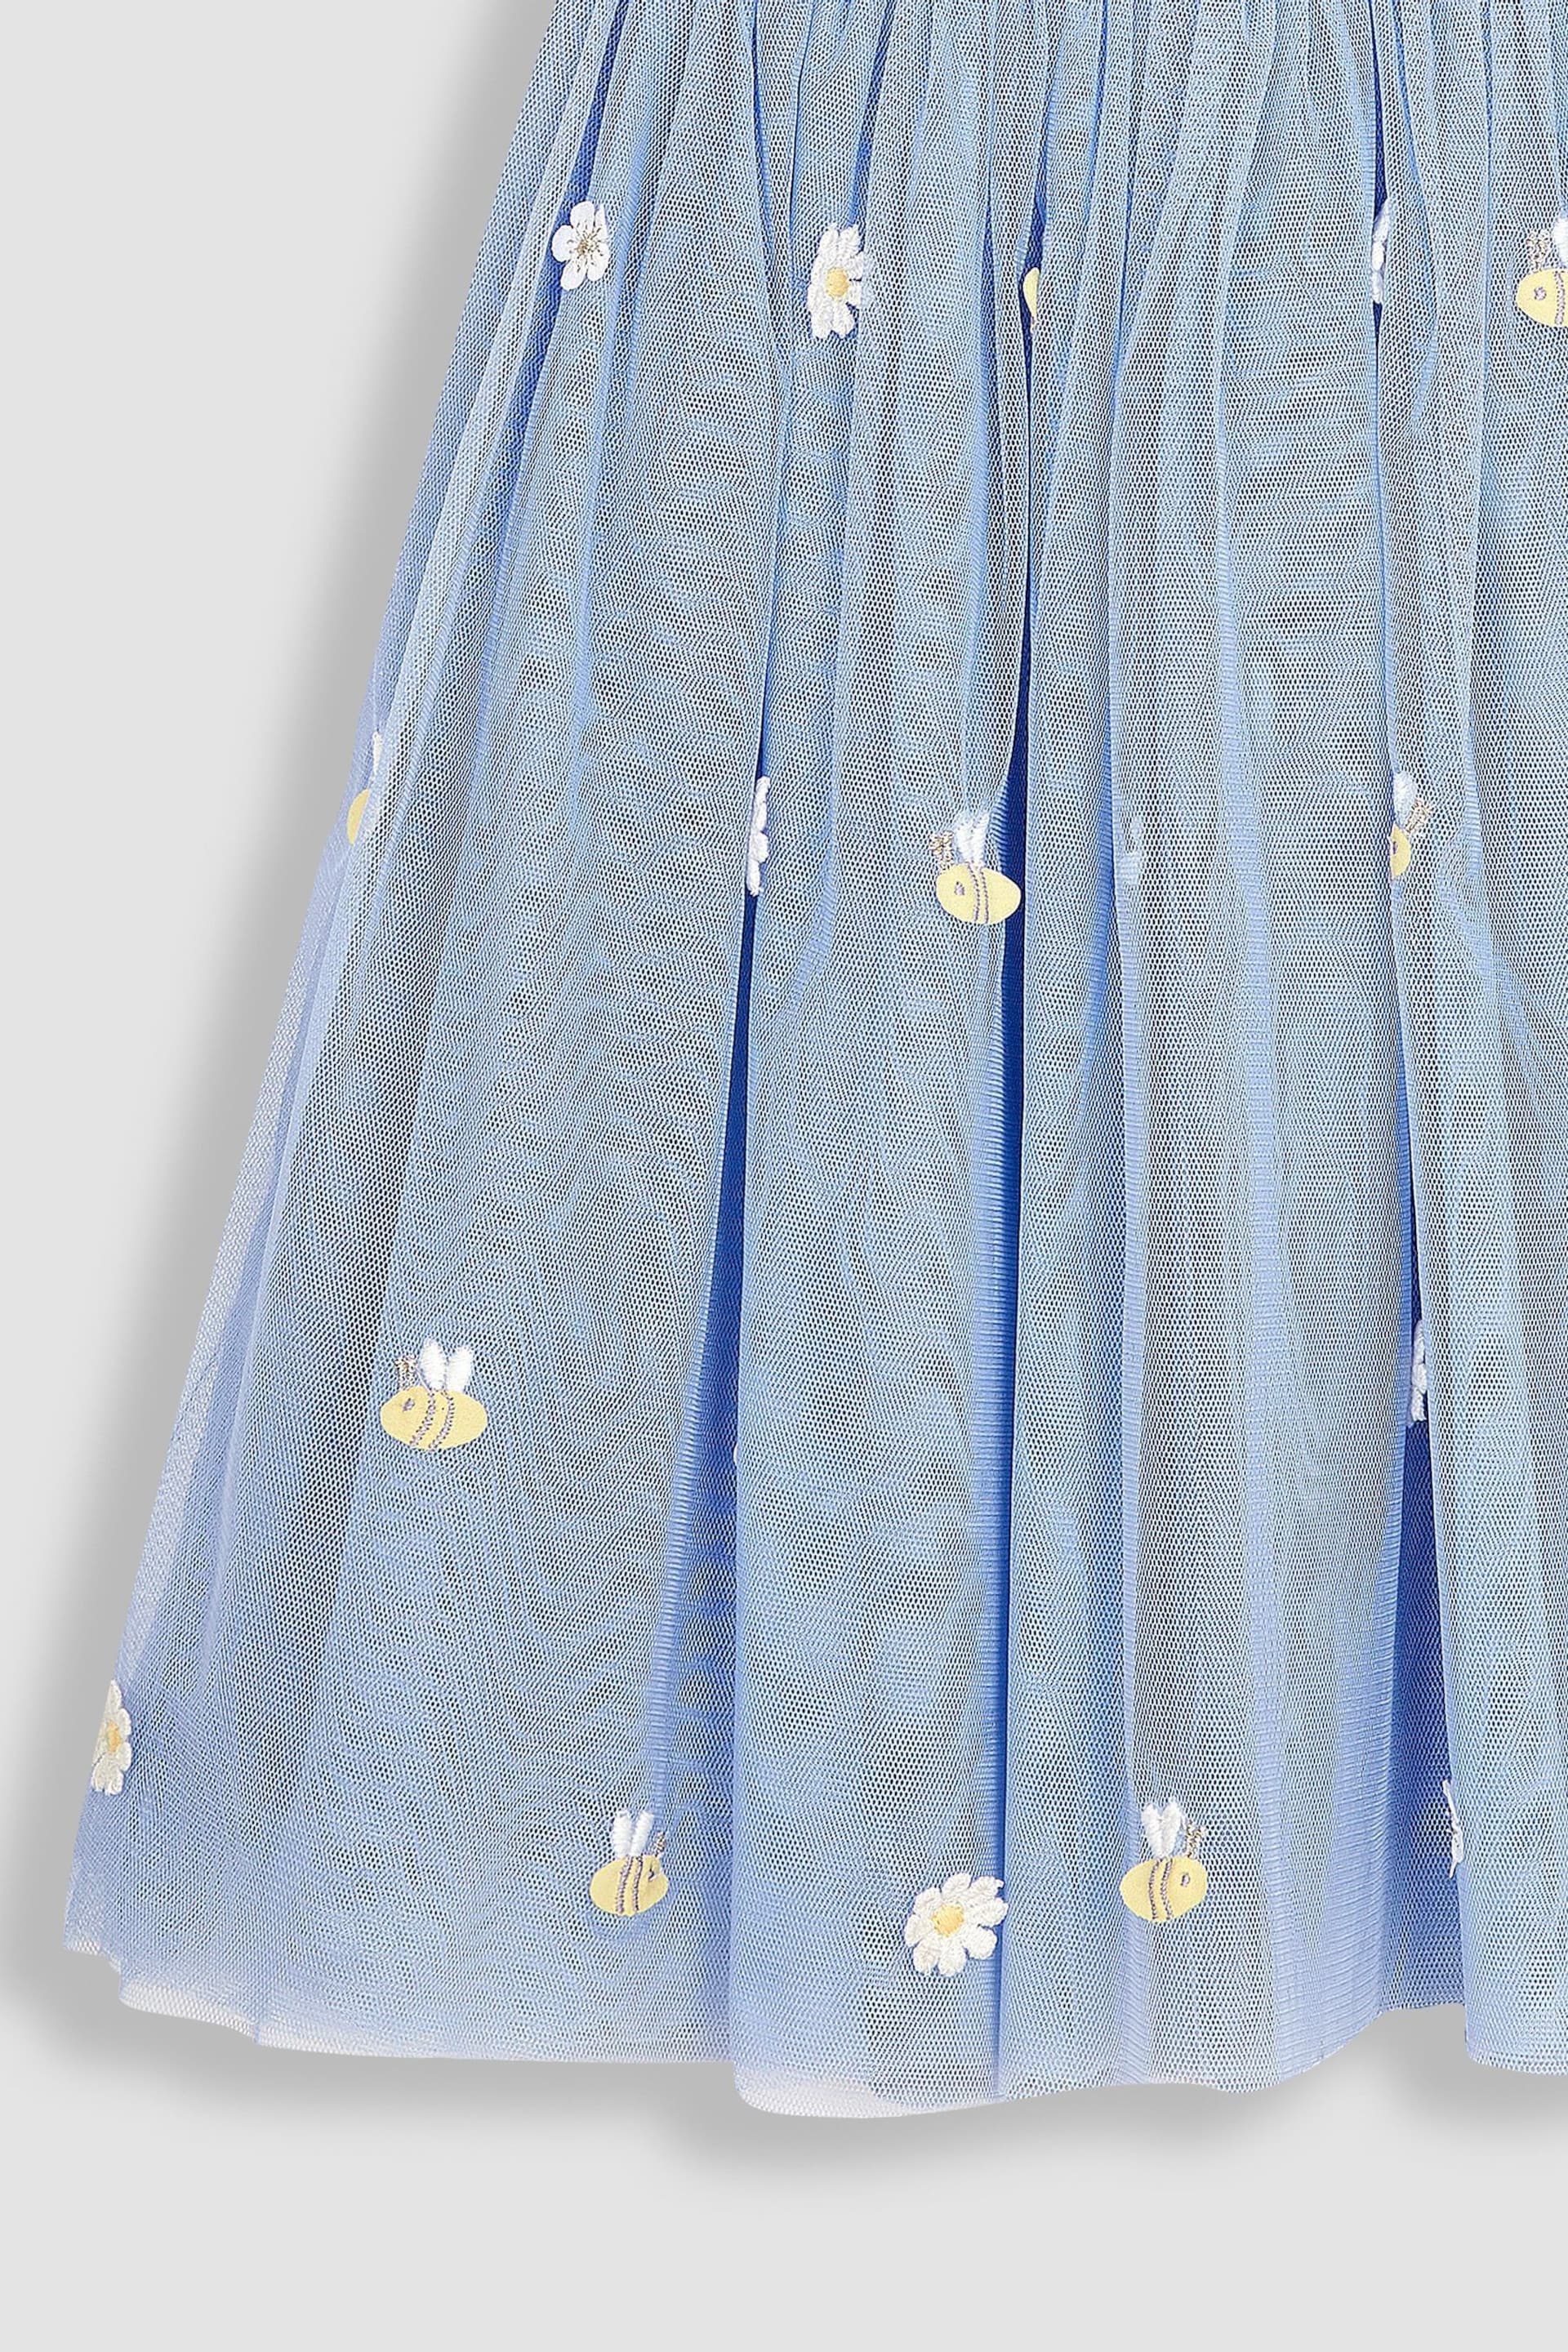 JoJo Maman Bébé Cornflower Daisy & Bee Embroidered Tulle Party Dress - Image 7 of 7